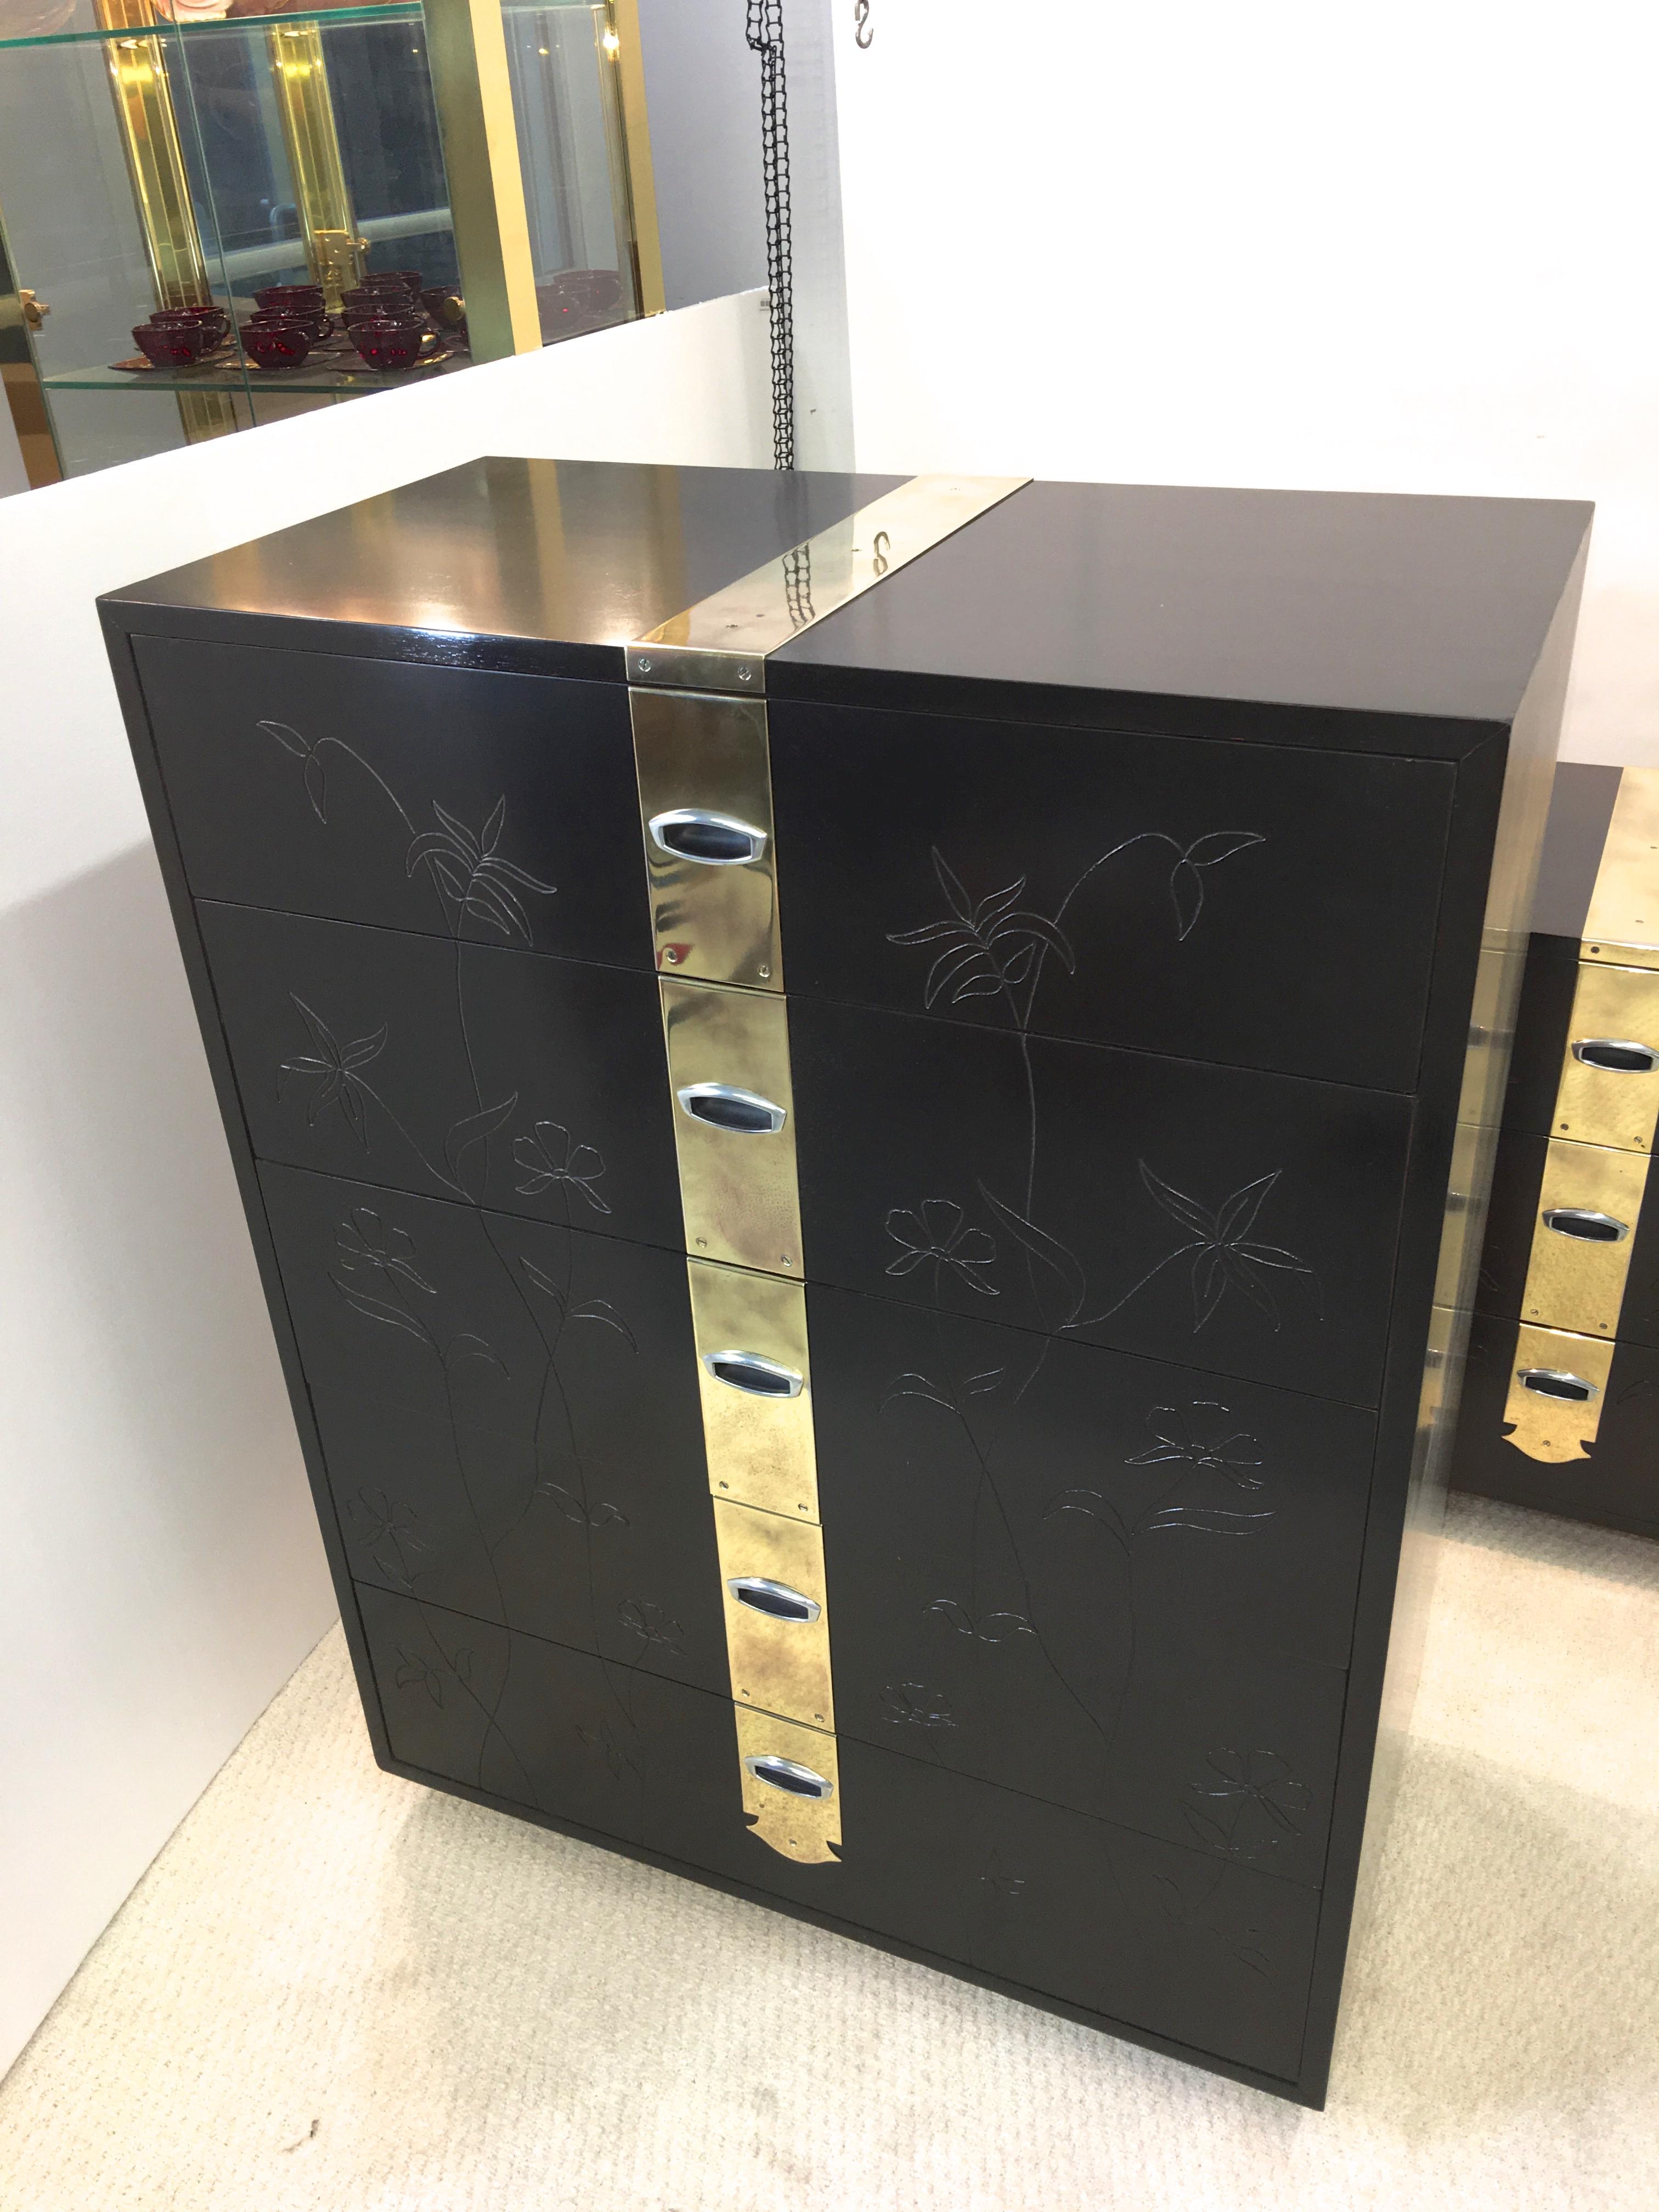 Max Kuehne Style Floral Incised Tall Chest of Drawers with Brass Strapping In Good Condition For Sale In Hanover, MA